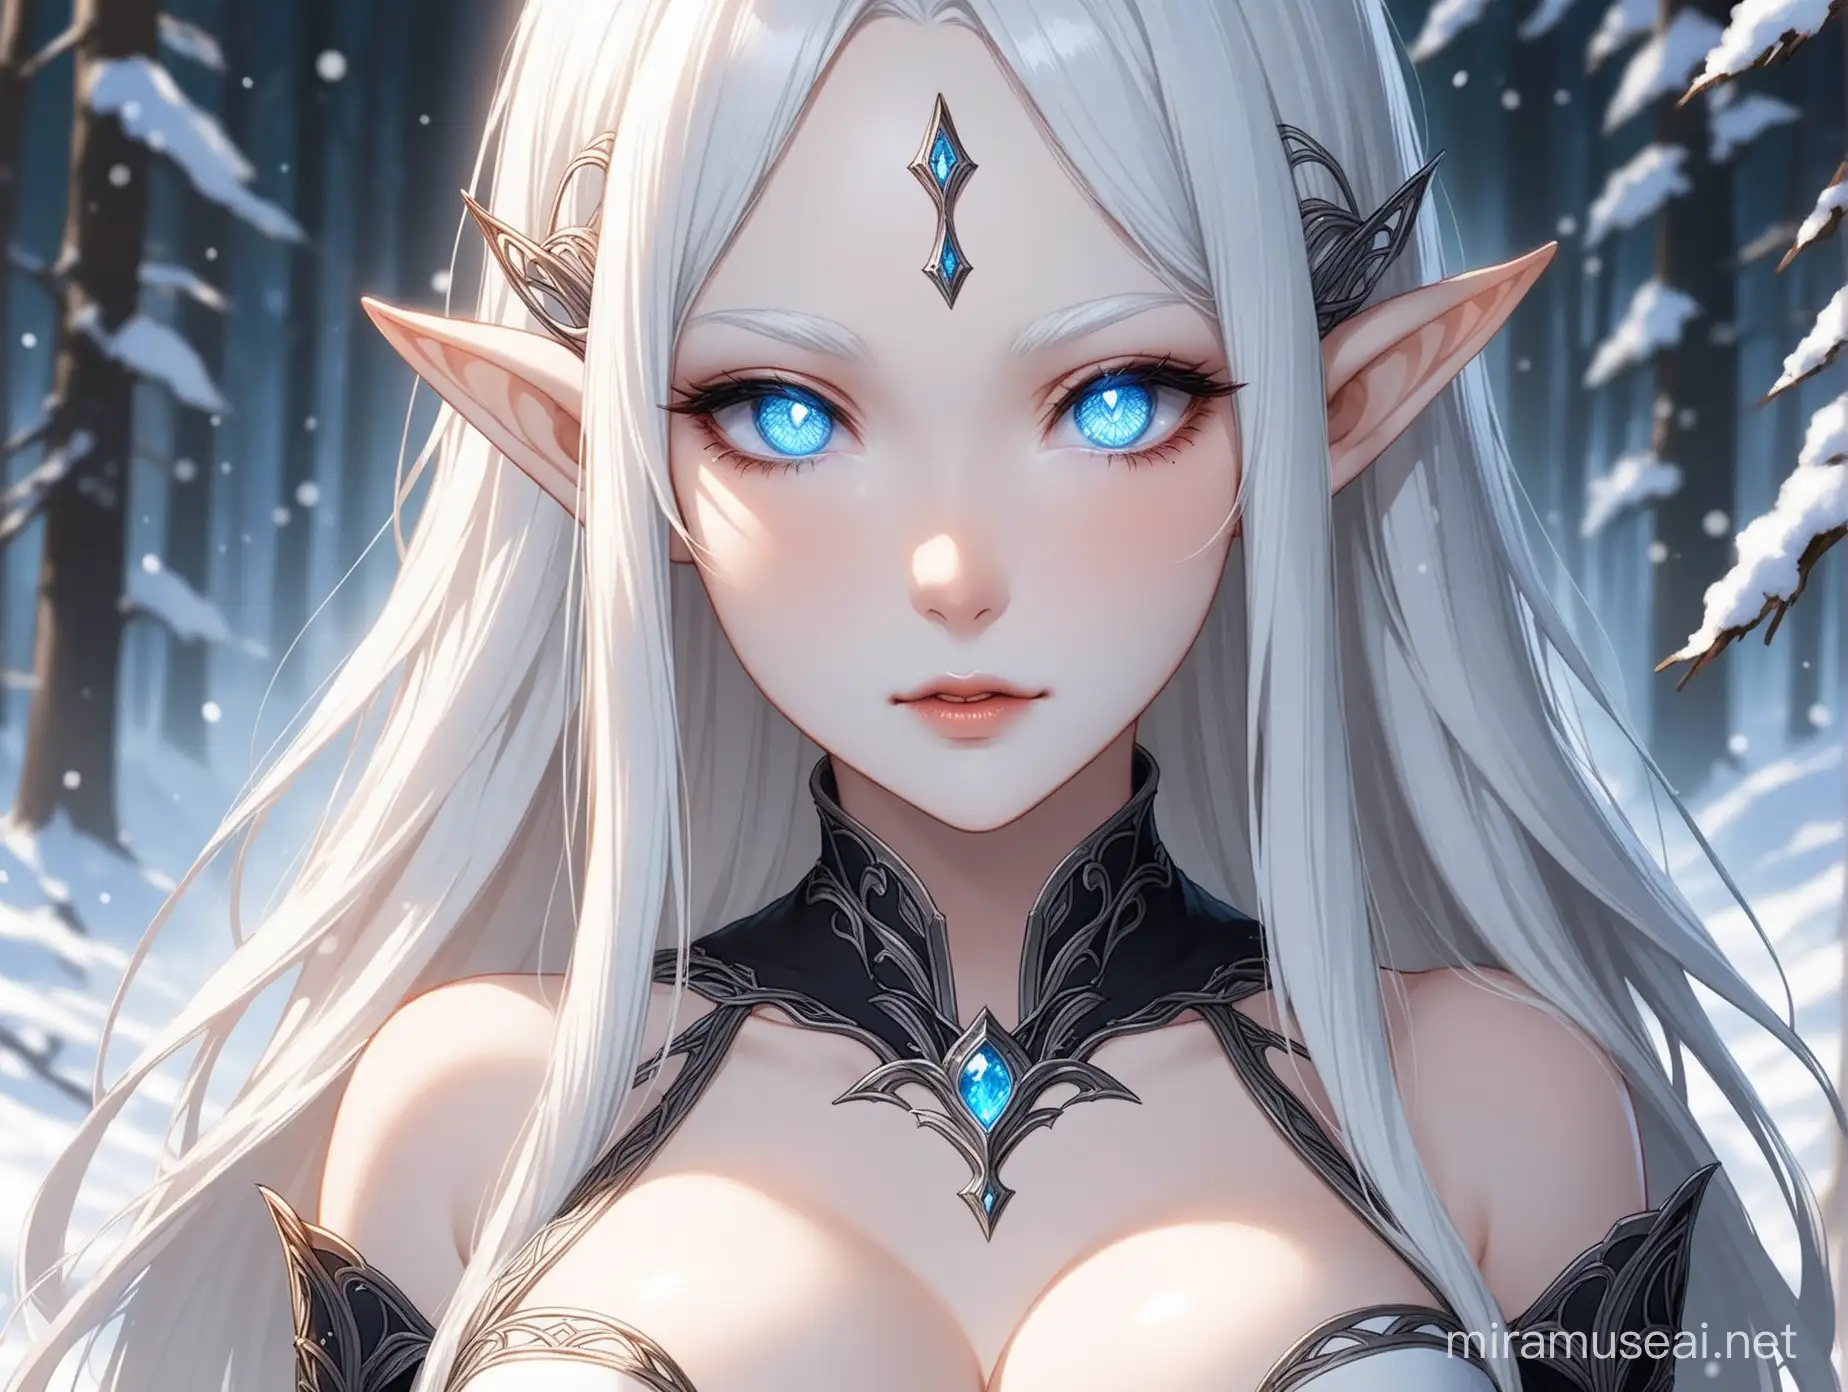 Elegant Elven Maiden with SnowWhite Features and Piercing Gray Eyes